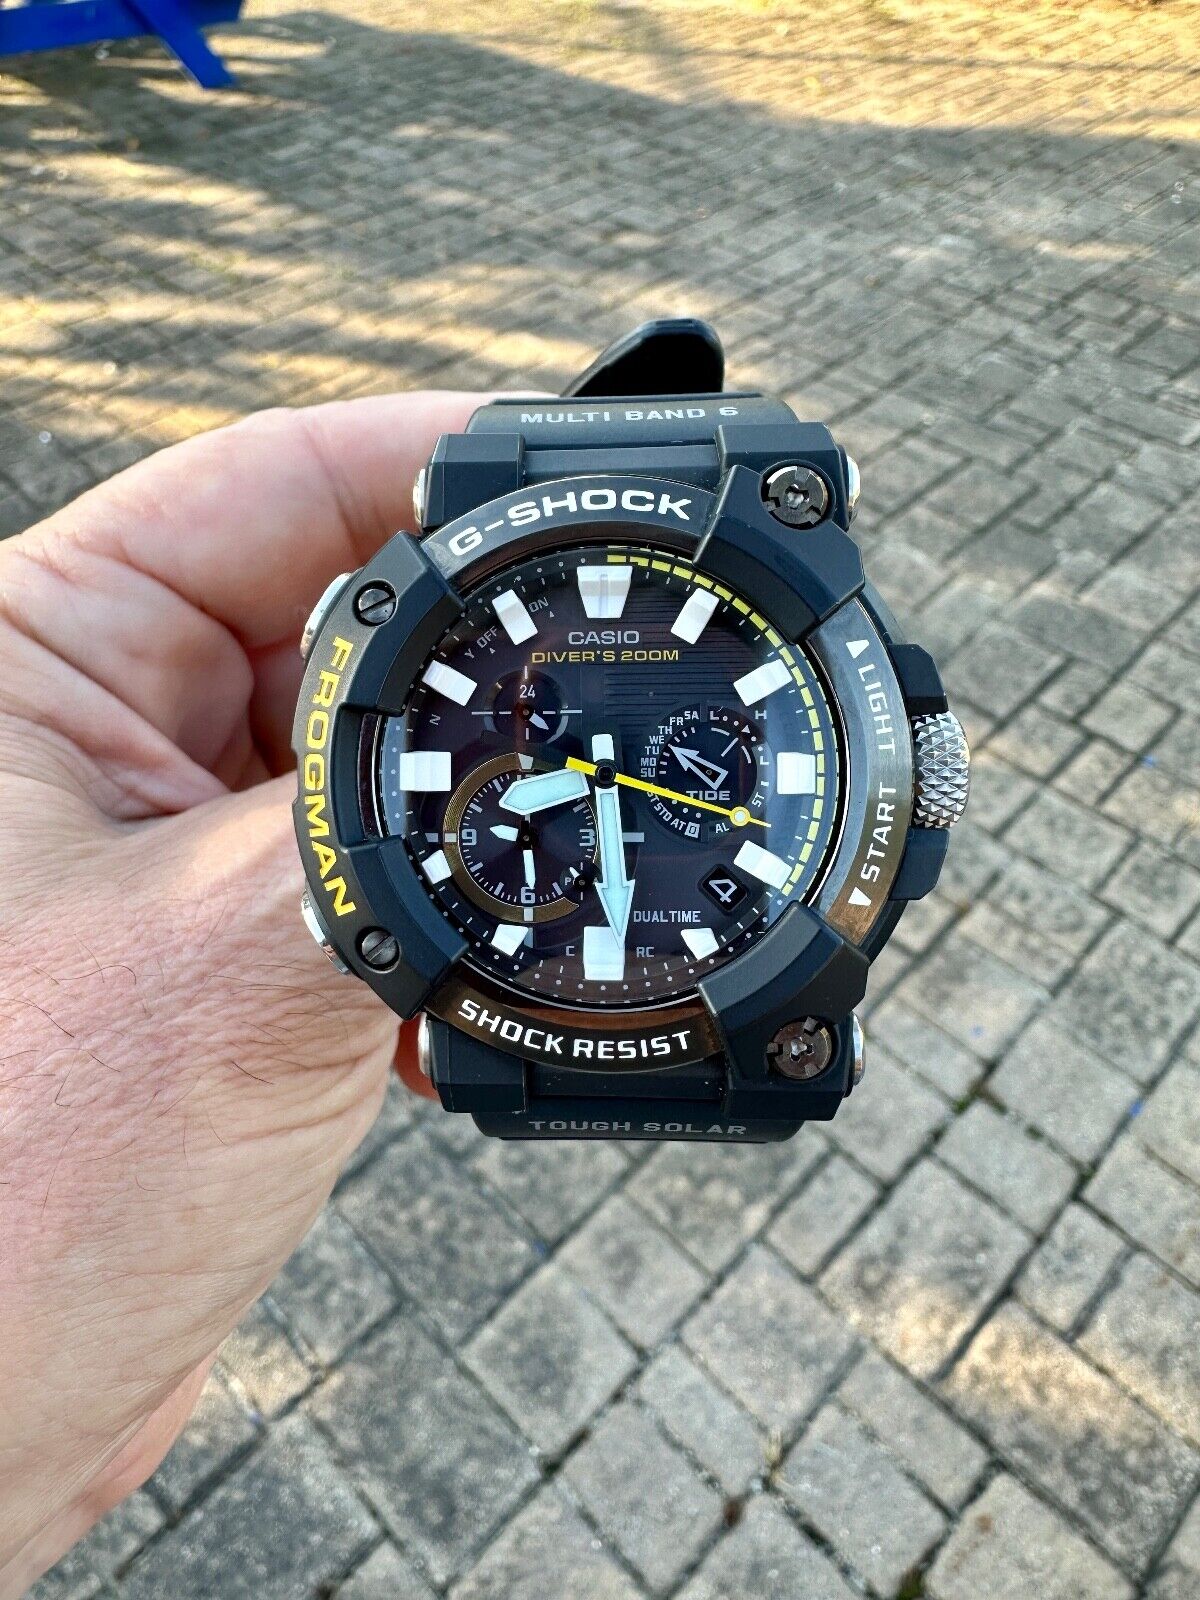 CASIO G-SHOCK FROGMAN GWF-A1000-1AJF - Used but A++++ Excellent